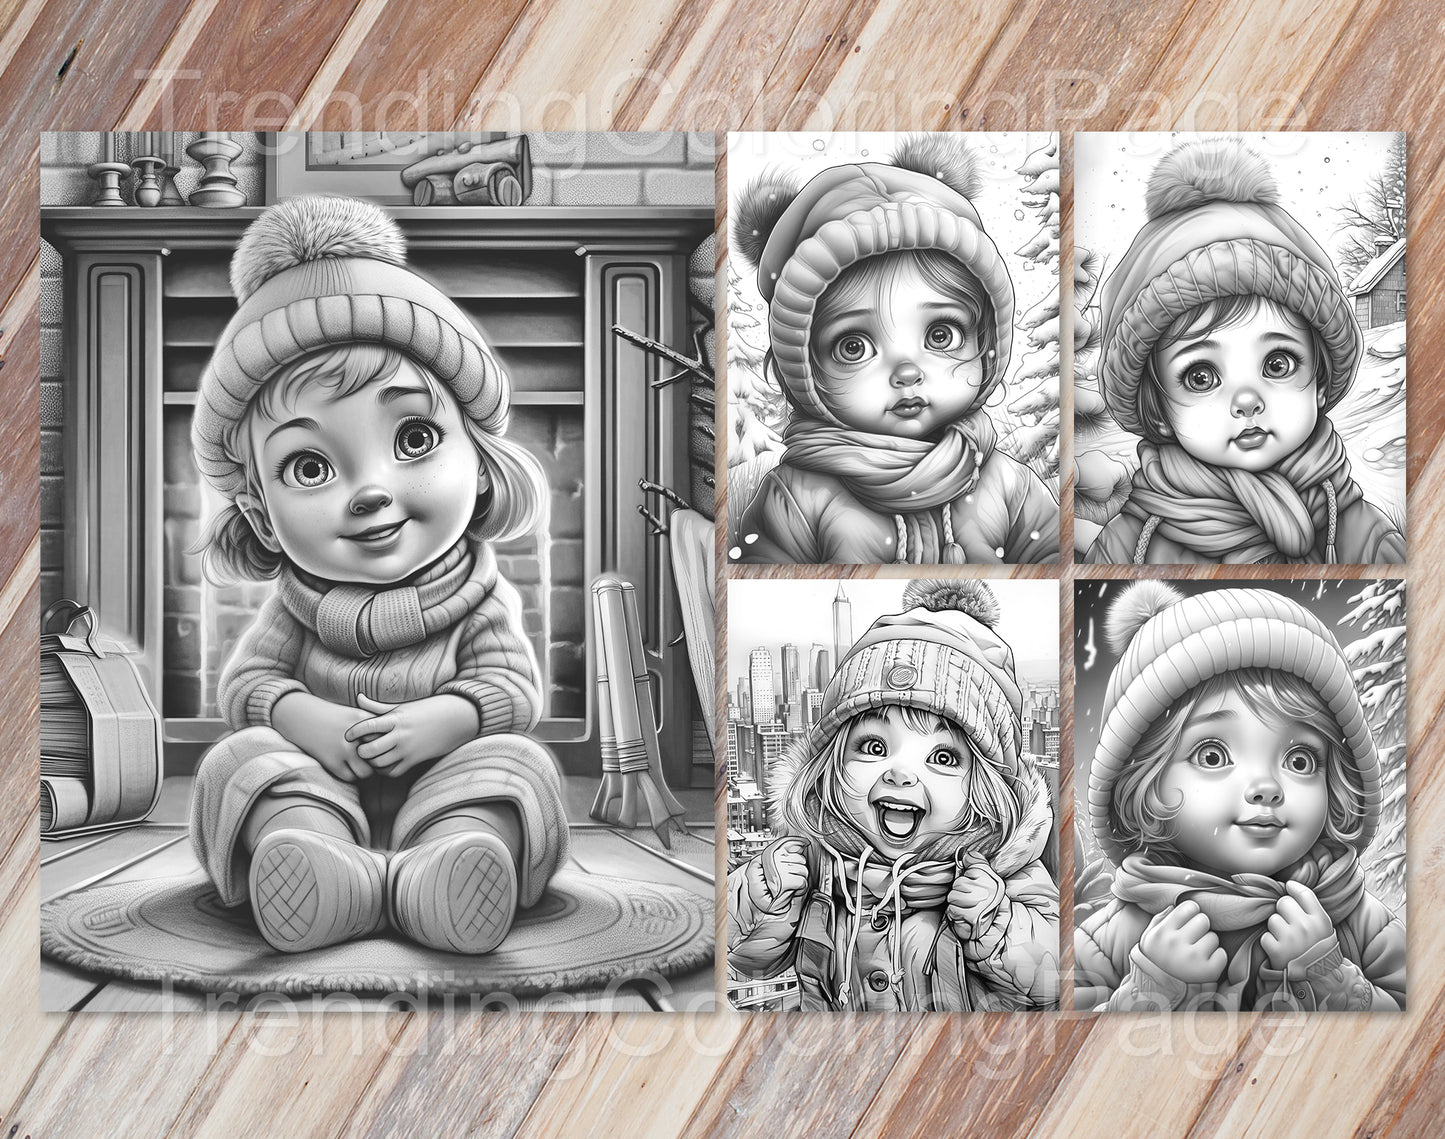 25 Baby Girl Winter Grayscale Coloring Pages - Instant Download - Printable PDF